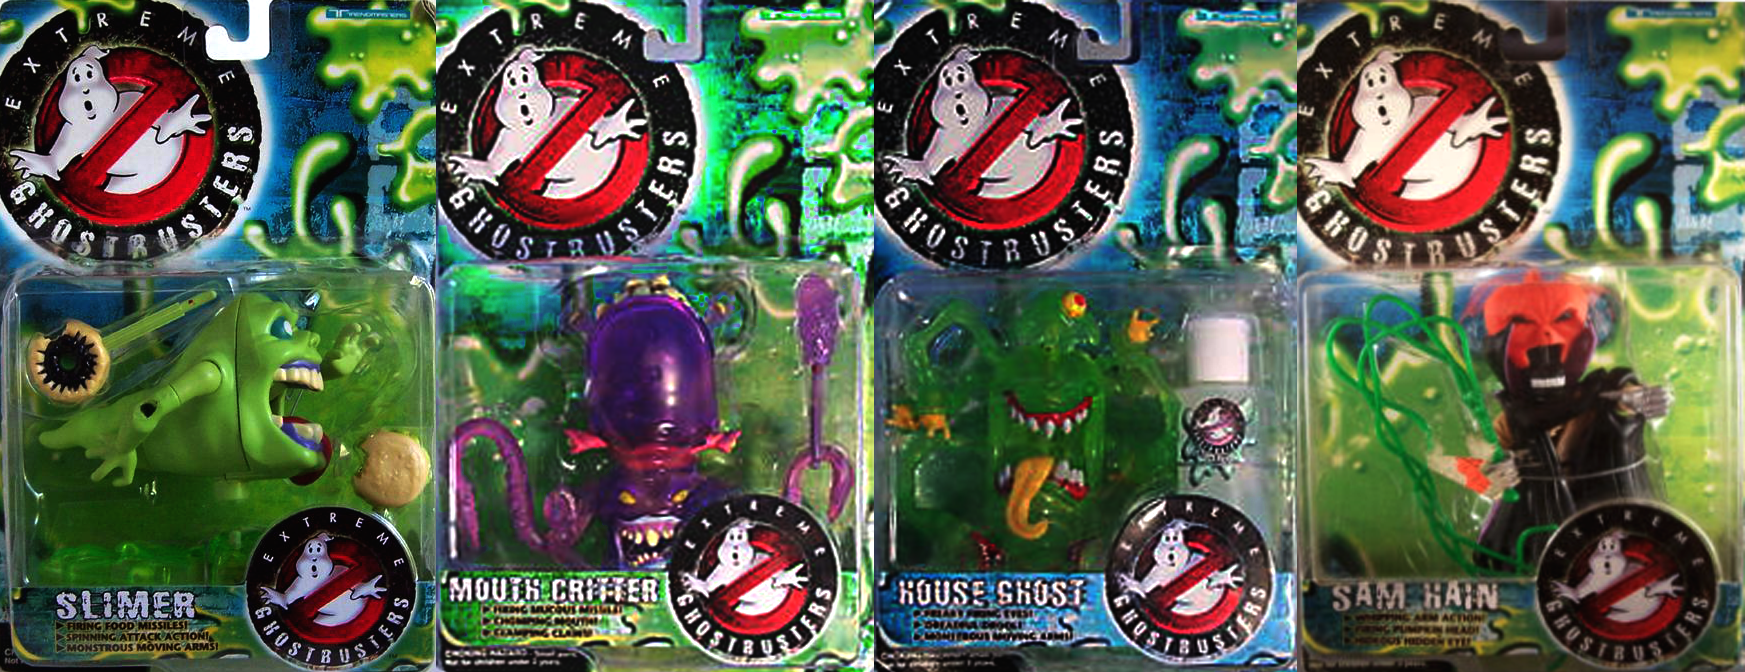 extreme ghostbusters figures